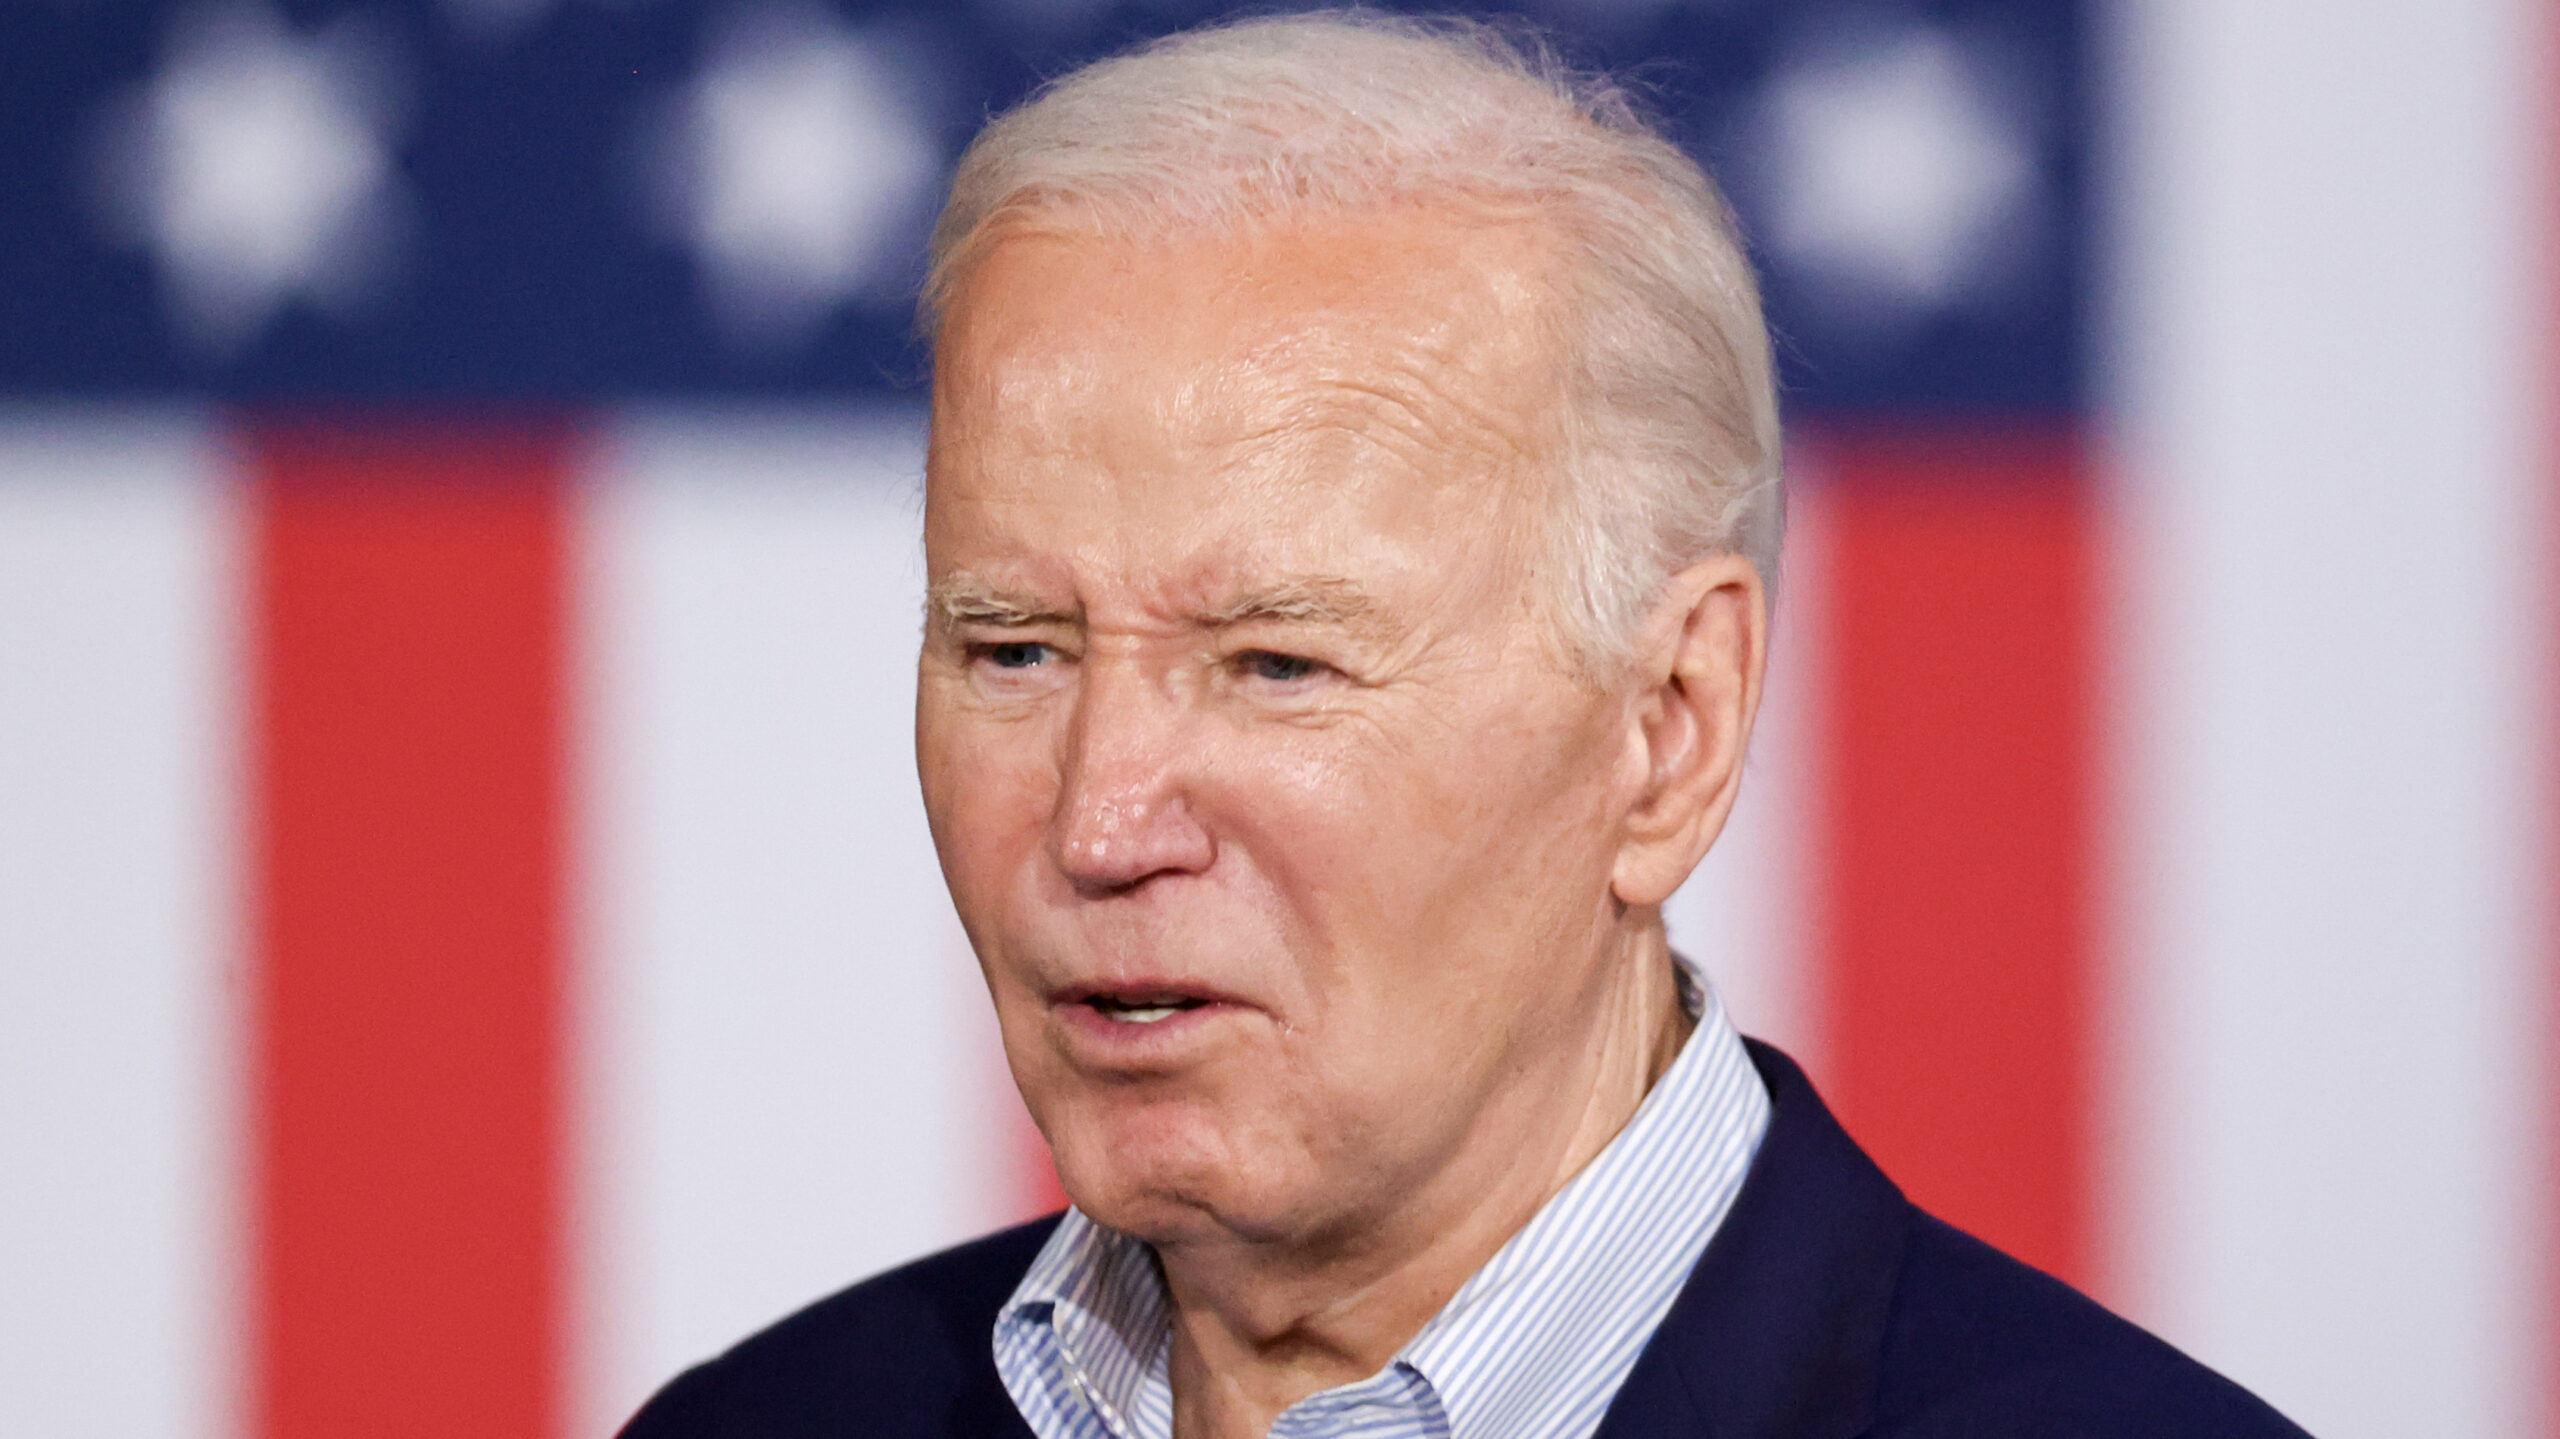 Biden’s Latest Attempt to Appeal to Young Voters: Introducing New Student Loan Debt Relief